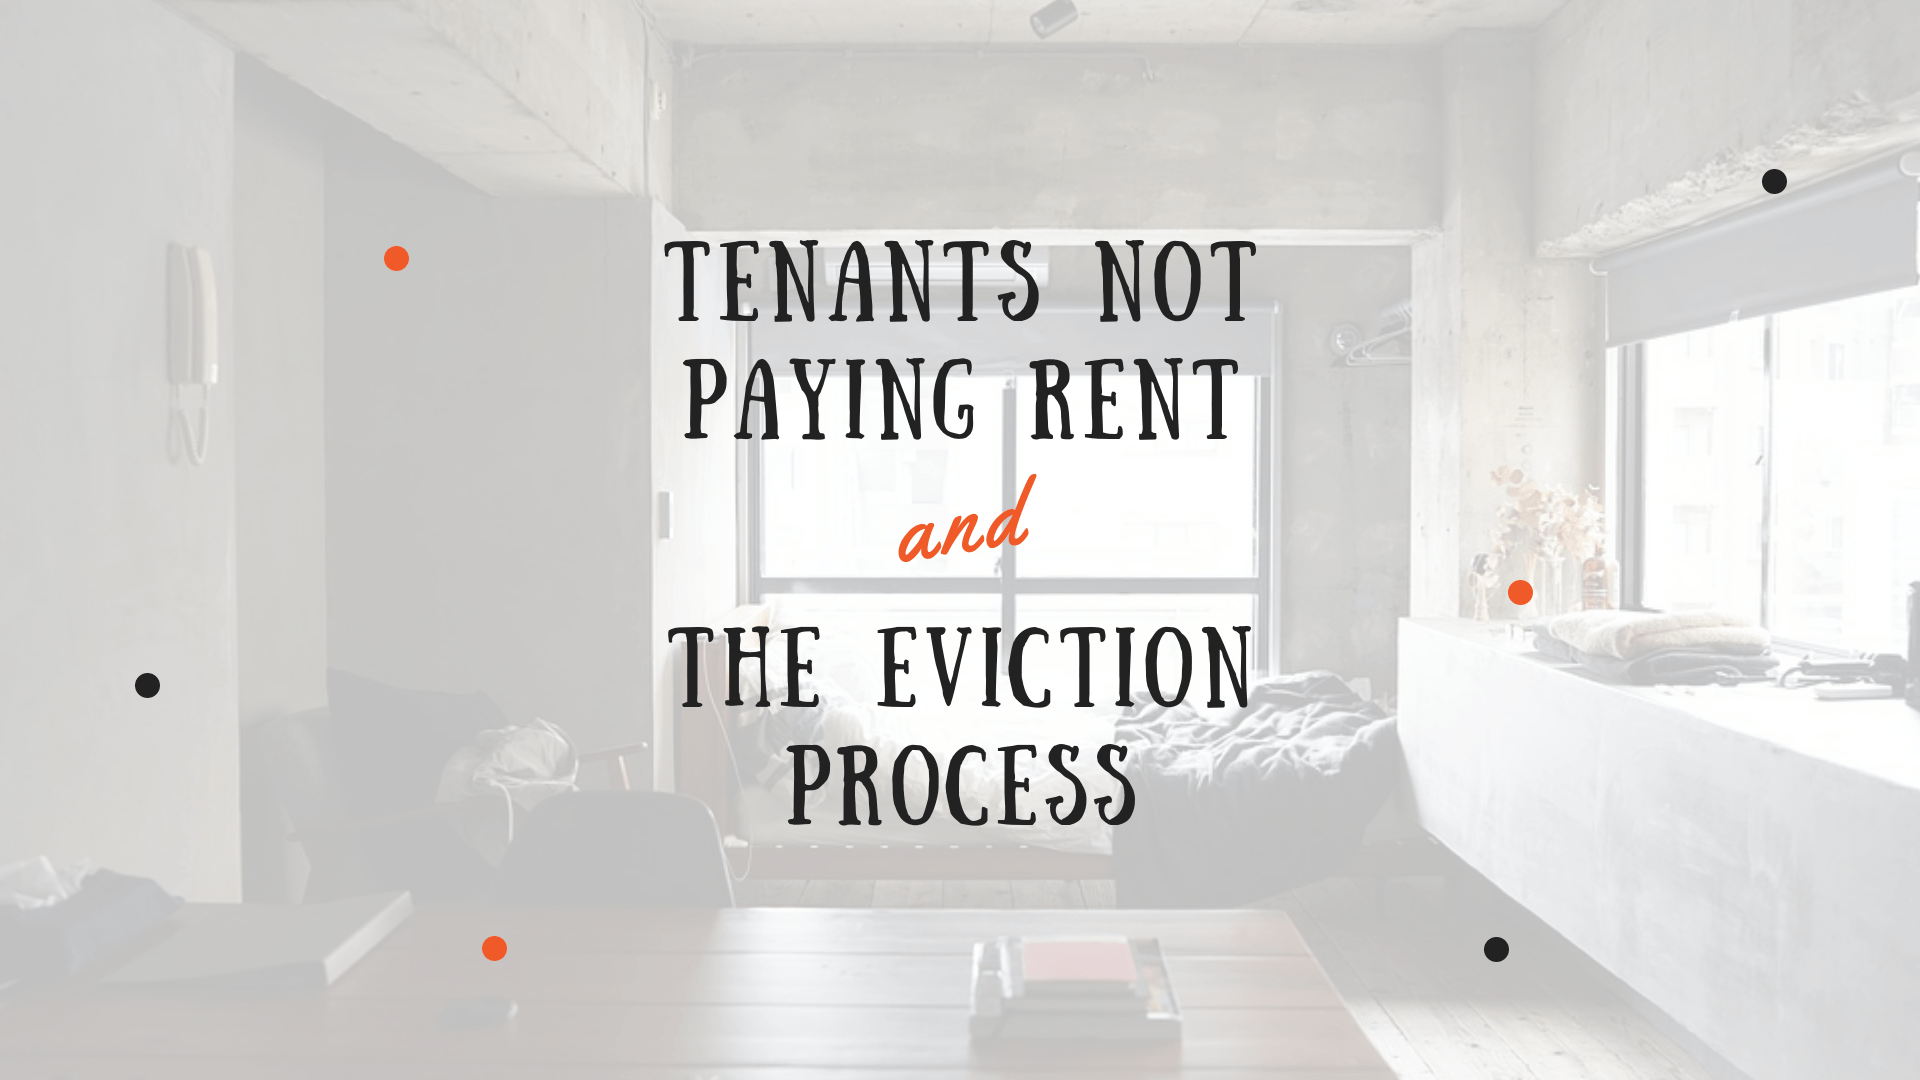 How to Limit Tenants Not Paying Rent & The Eviction Process in Northridge